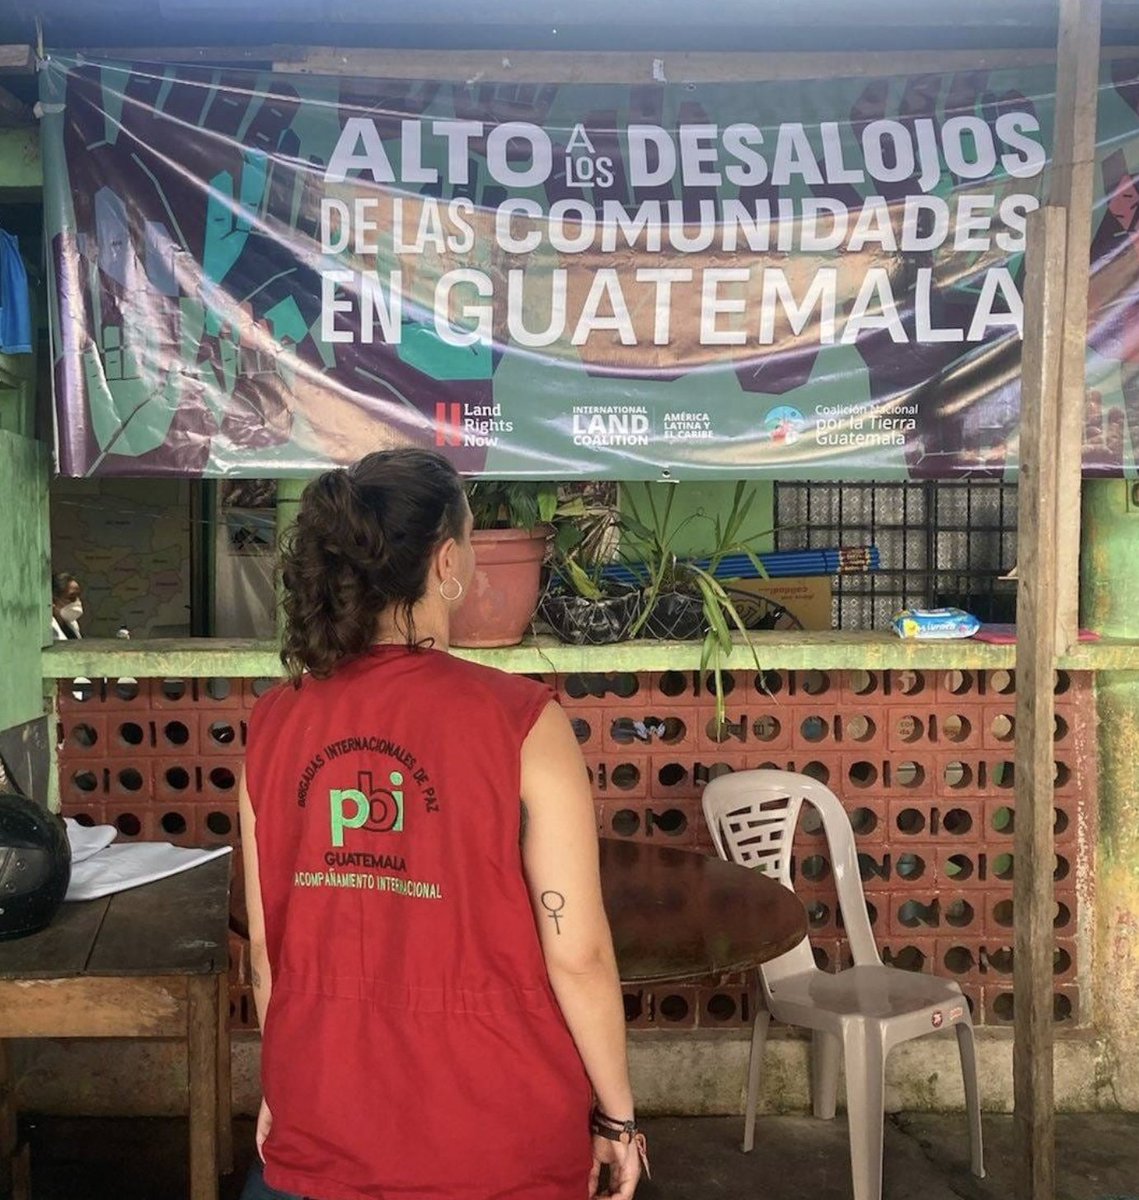 Members of #PBIGuatemala accompanied Ccda Verapaz as they helped provide medical care for 20 displaced families in the Alta Verapaz region.
#PBIaccompanies

Learn more:
tinyurl.com/ym3c5nap